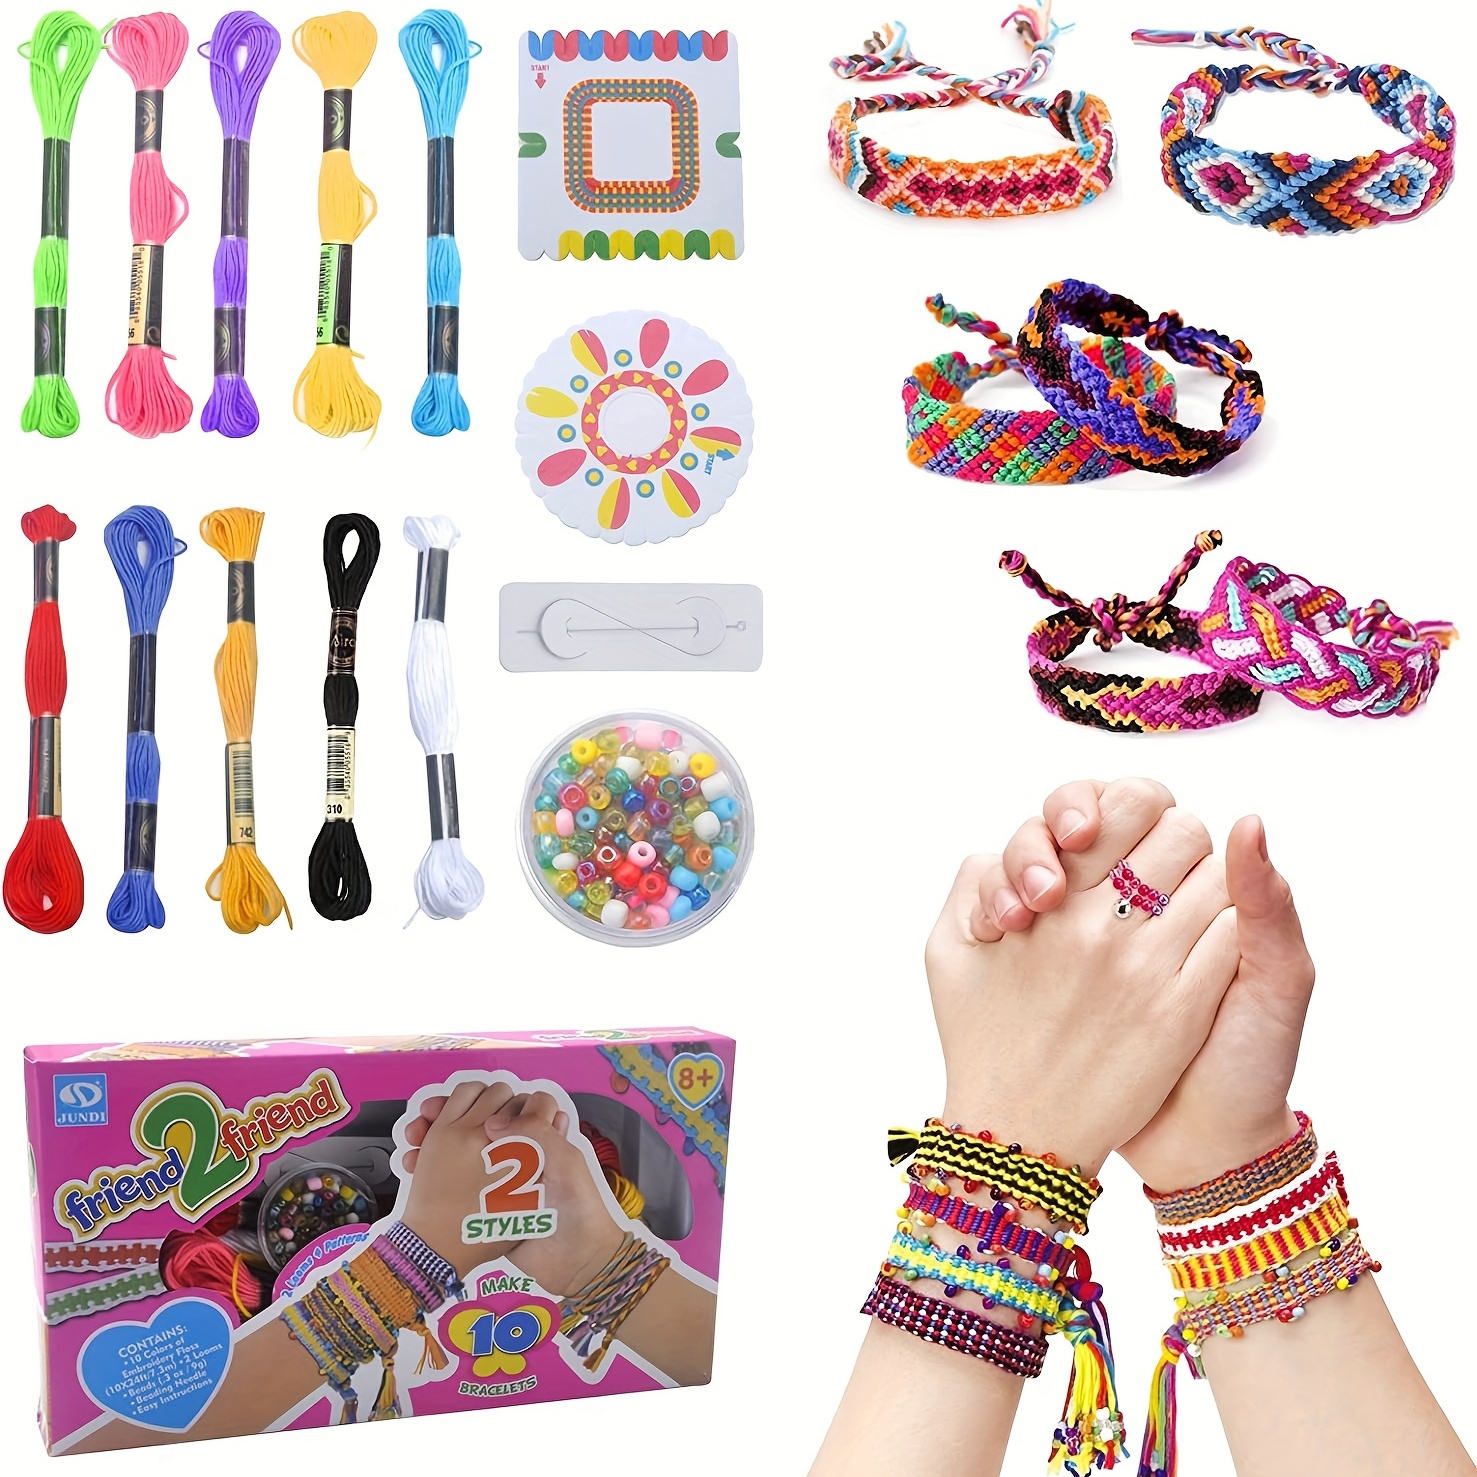  VERTOY Friendship Bracelet Making Kit for Girls - Cool Arts and  Crafts Toys for 6 7 8 9 10 11 12 Years Old, Bracelet String and Rewarding  Activity, Best Birthday Gifts for Teen Girls : Toys & Games